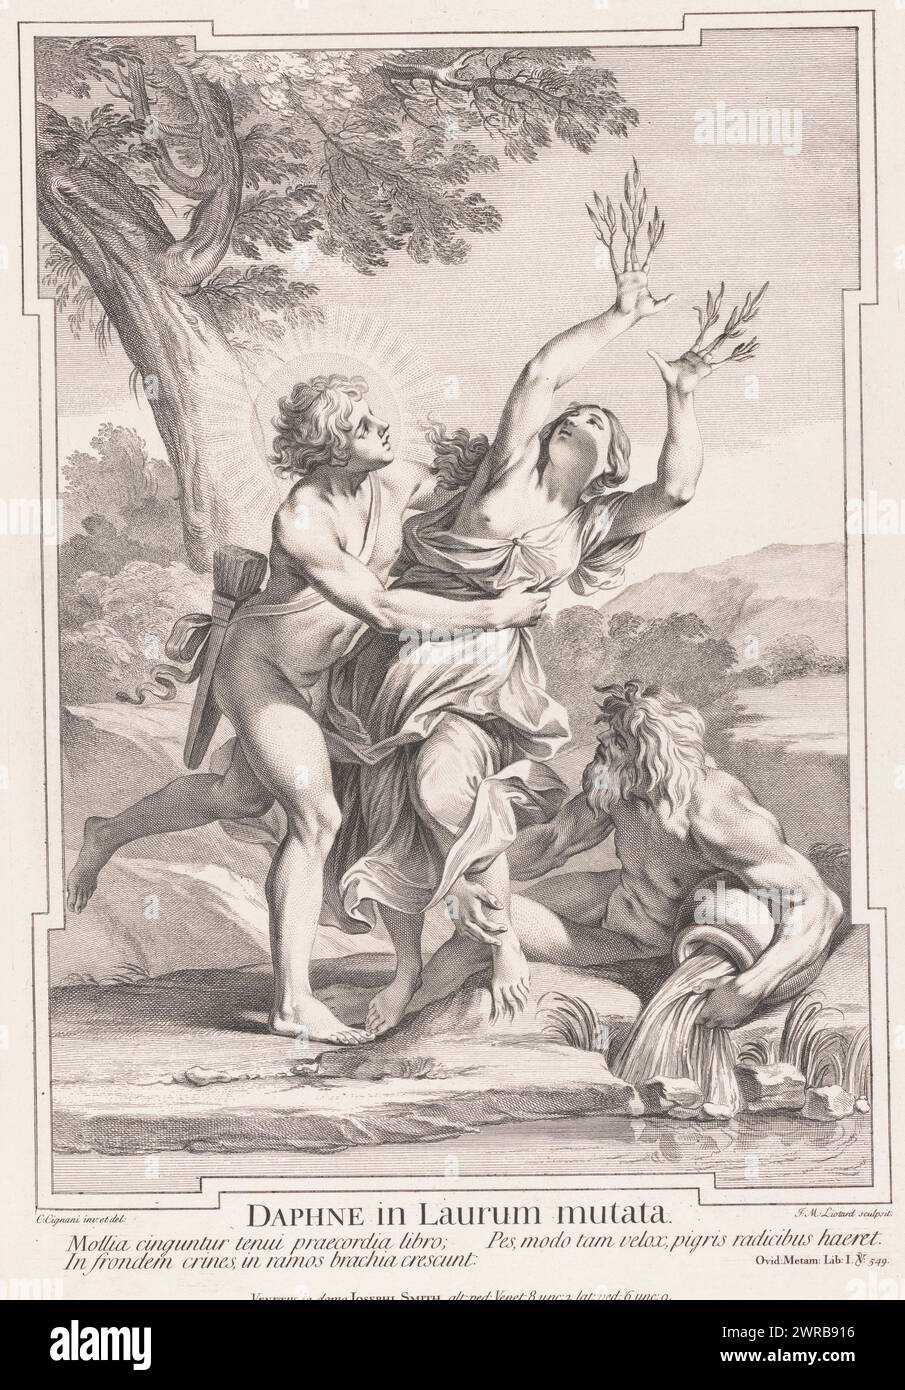 Apollo and Daphne, Daphne in Laurum mutata (title on object), Prints after works by Carlo Cignani (series title), Monochromata Septem Caroli Cignanti Bononiensis (...) (series title), print maker: Jean Michel Liotard, after drawing by: Carlo Cignani, Publius Ovidius Naso, Venice, 1743, paper, etching, engraving, height 501 mm × width 350 mm, print Stock Photo